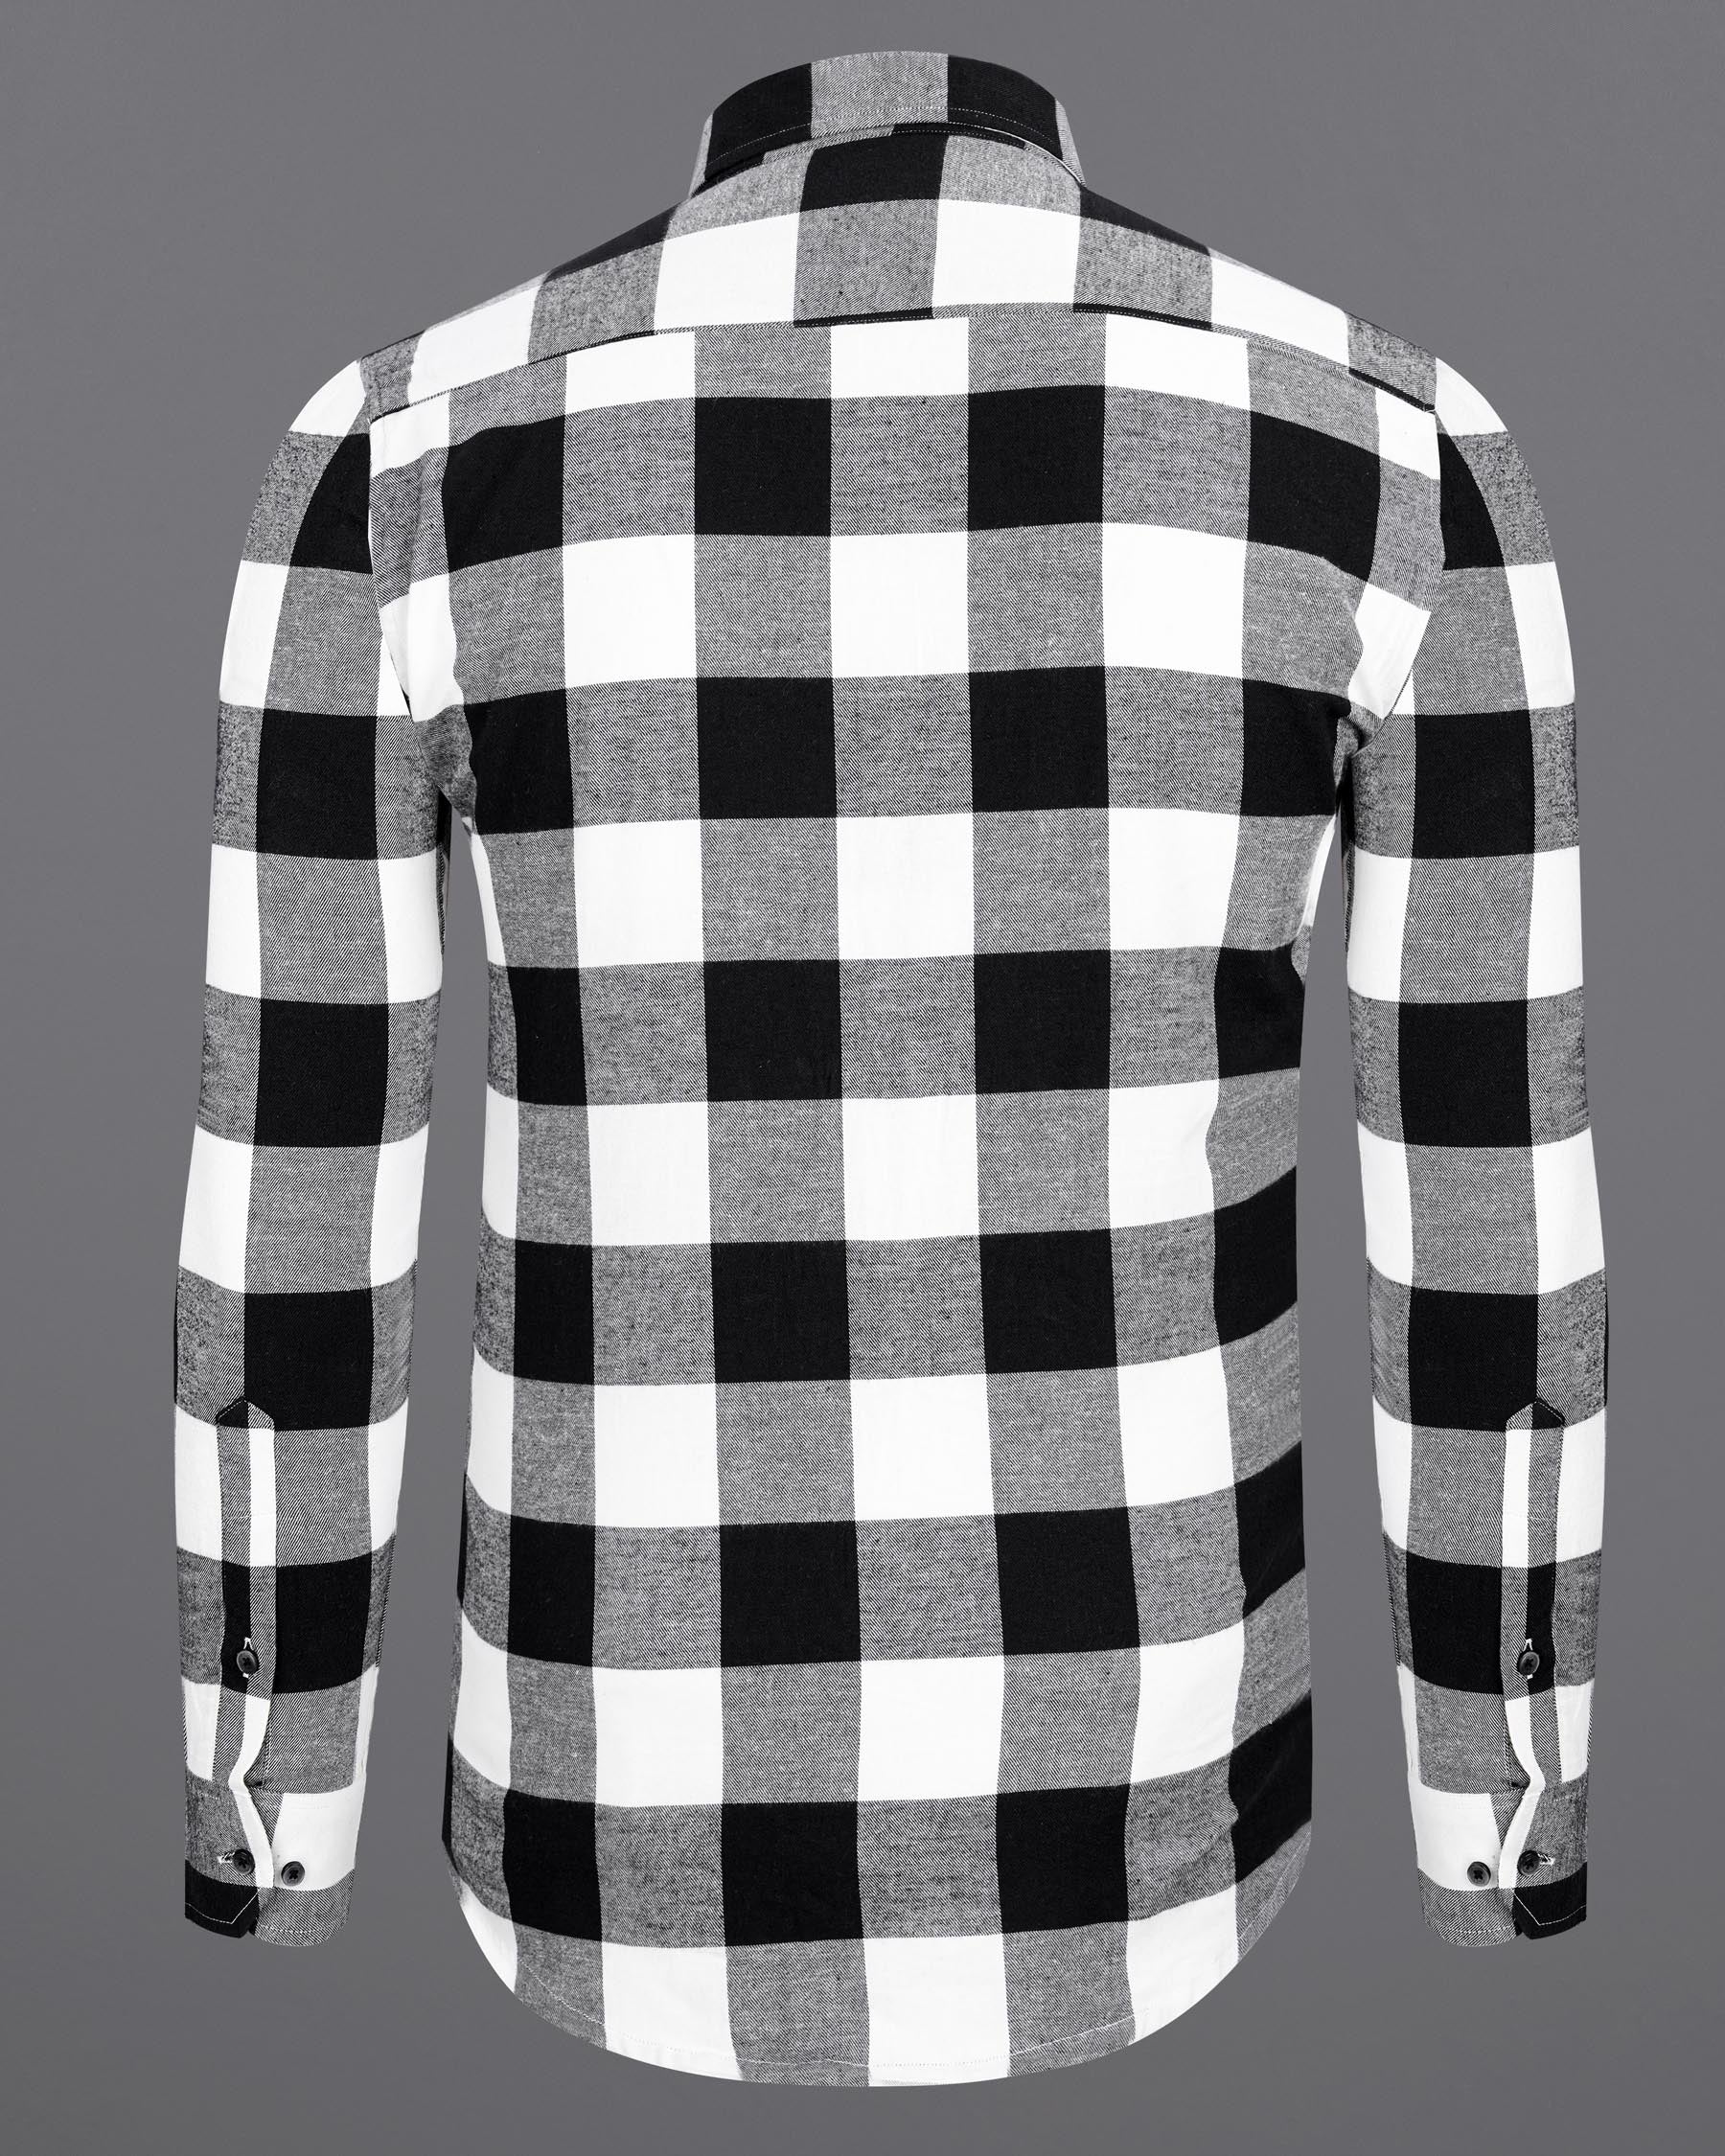 Jade Black and White Checkered Flannel Shirt 7692-BD-BLK-38, 7692-BD-BLK-H-38, 7692-BD-BLK-39,7692-BD-BLK-H-39, 7692-BD-BLK-40, 7692-BD-BLK-H-40, 7692-BD-BLK-42, 7692-BD-BLK-H-42, 7692-BD-BLK-44, 7692-BD-BLK-H-44, 7692-BD-BLK-46, 7692-BD-BLK-H-46, 7692-BD-BLK-48, 7692-BD-BLK-H-48, 7692-BD-BLK-50, 7692-BD-BLK-H-50, 7692-BD-BLK-52, 7692-BD-BLK-H-52